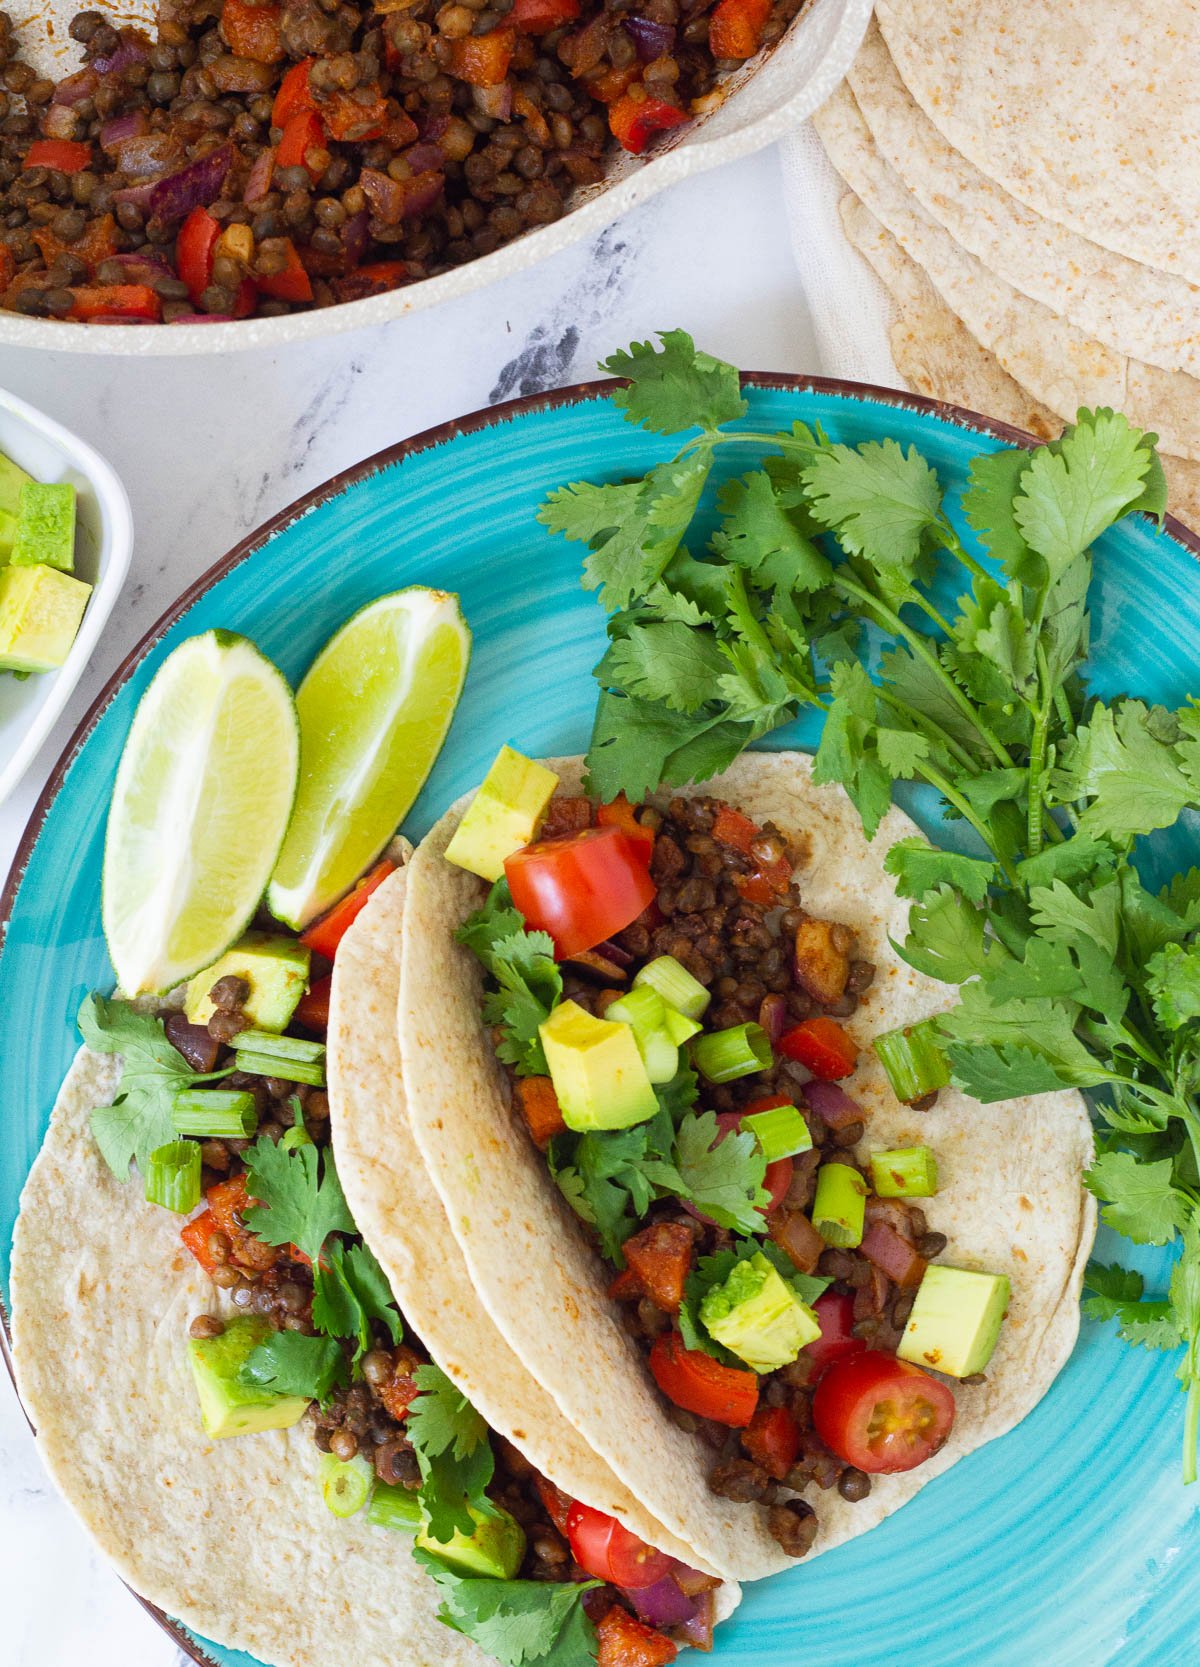 veganuary recipes: lentil tacos on turquoise plate